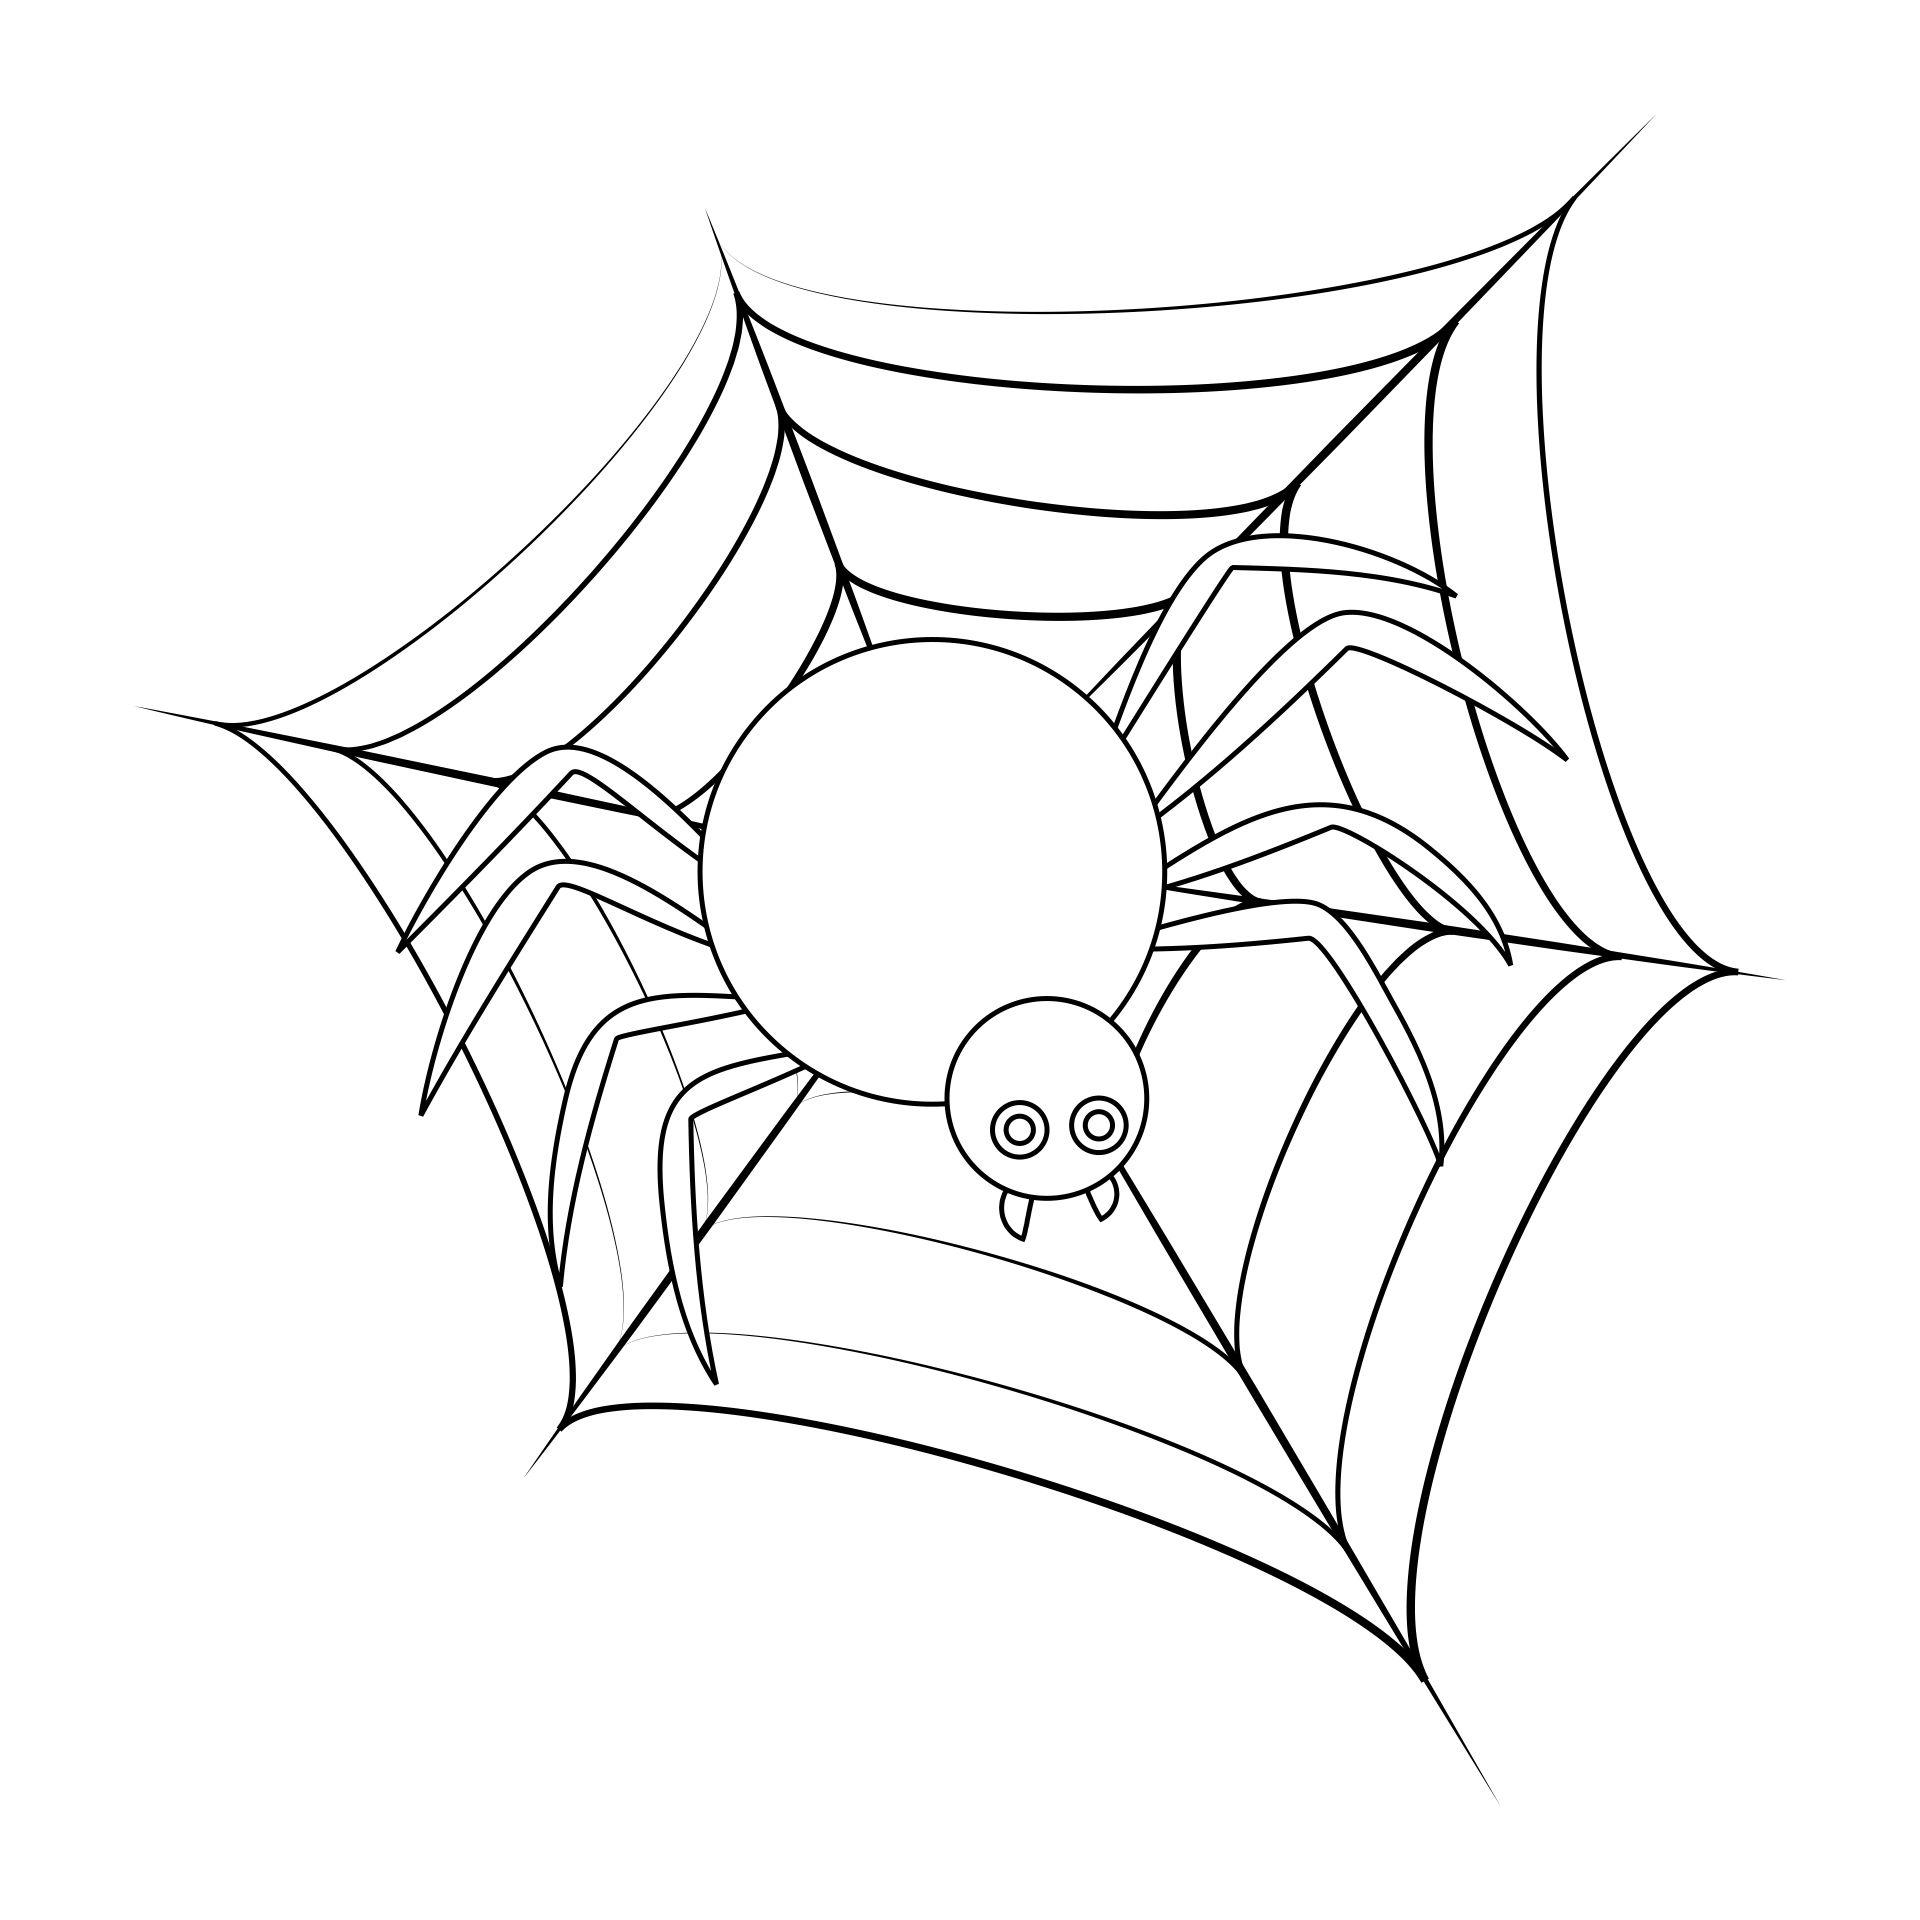 Drawings Of Spiders For Halloween